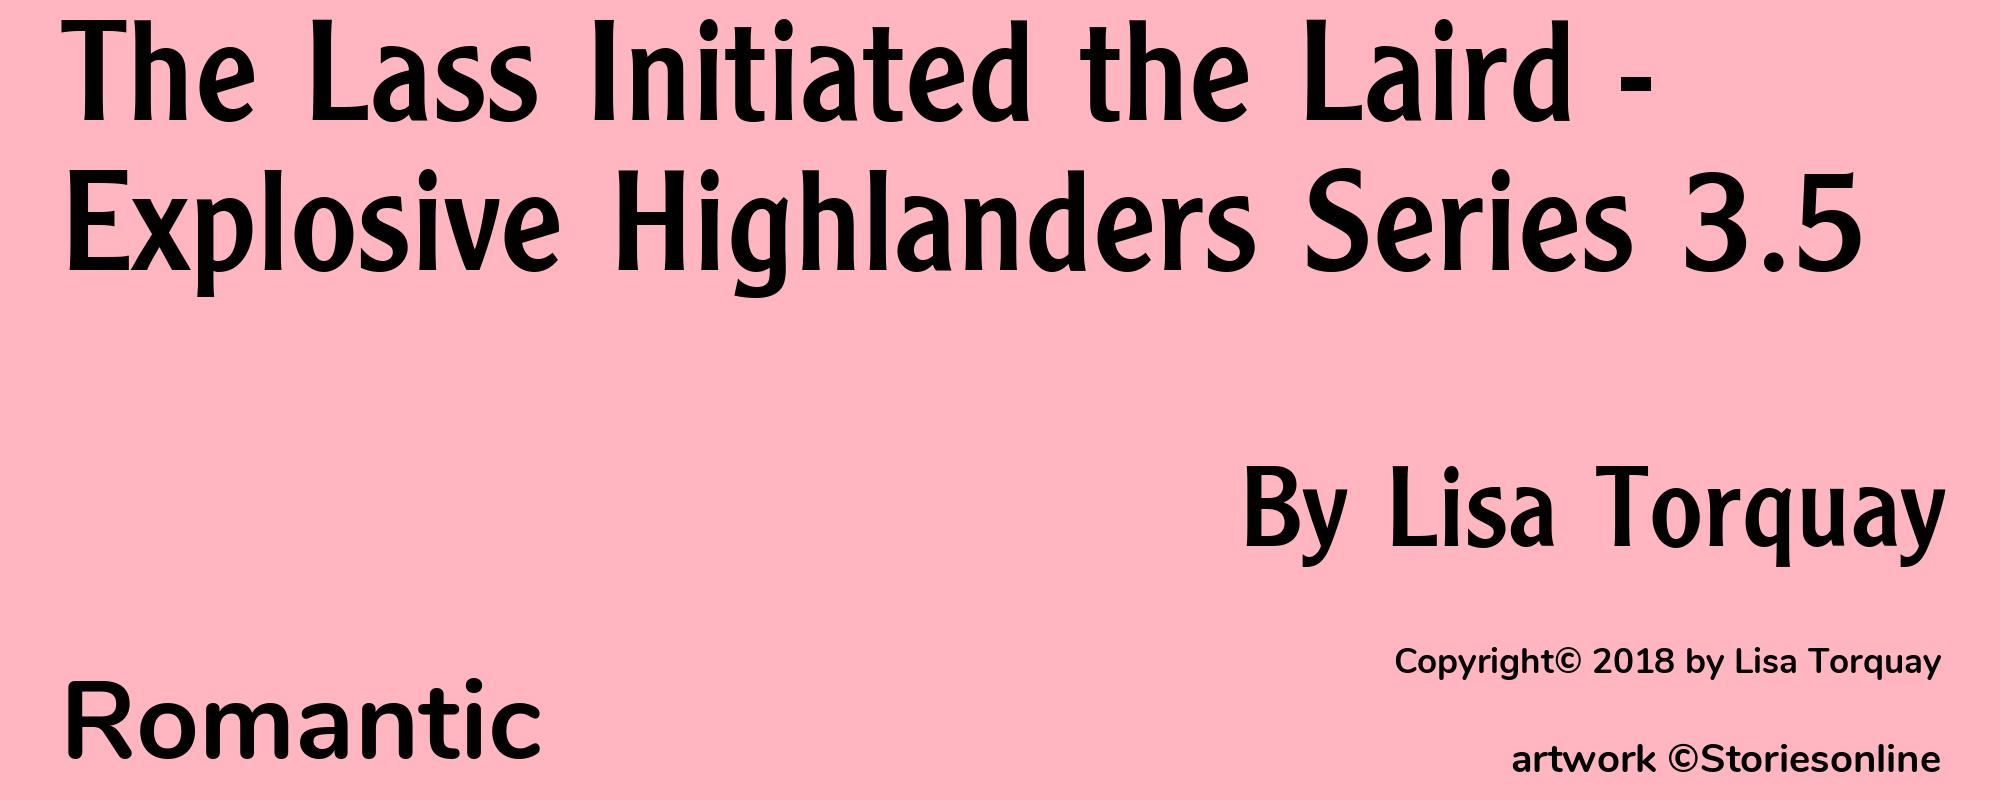 The Lass Initiated the Laird - Explosive Highlanders Series 3.5 - Cover